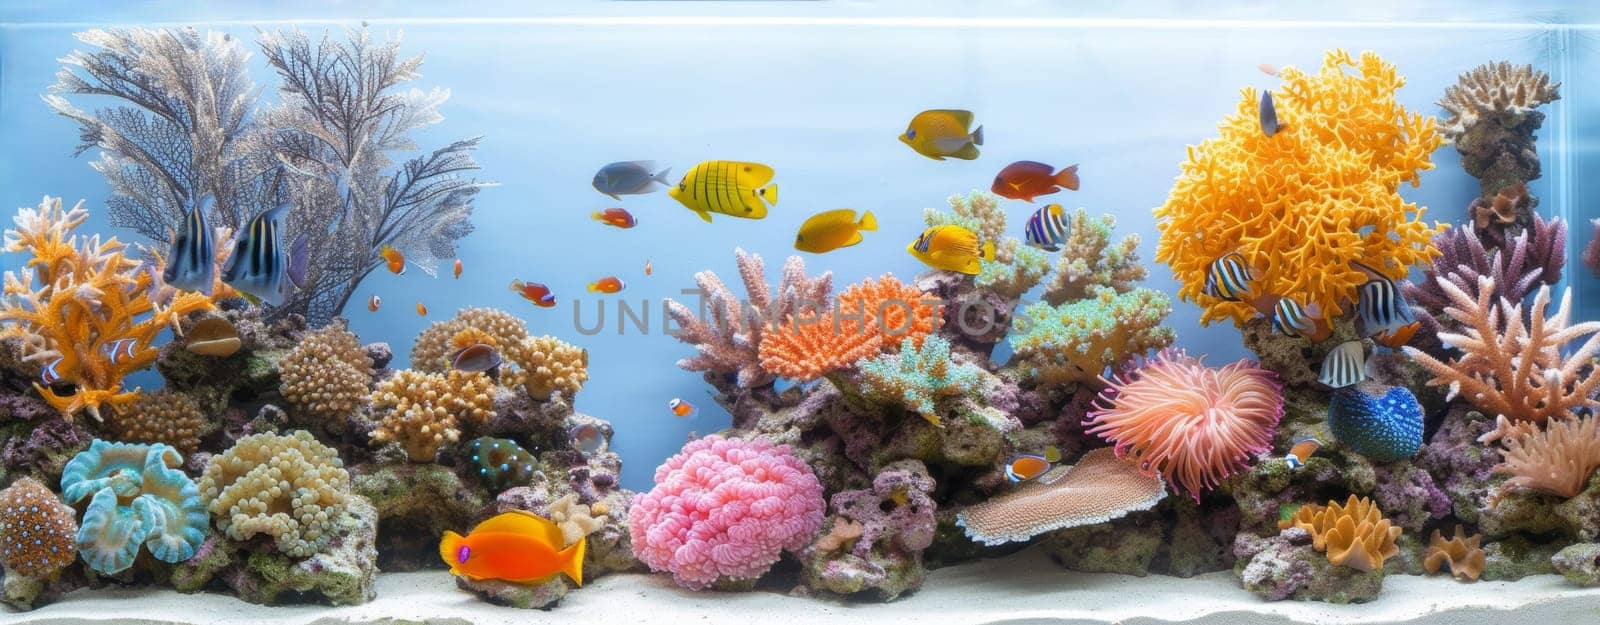 Vibrant underwater scene with colorful corals and tropical fish in a clear aquarium. by sfinks